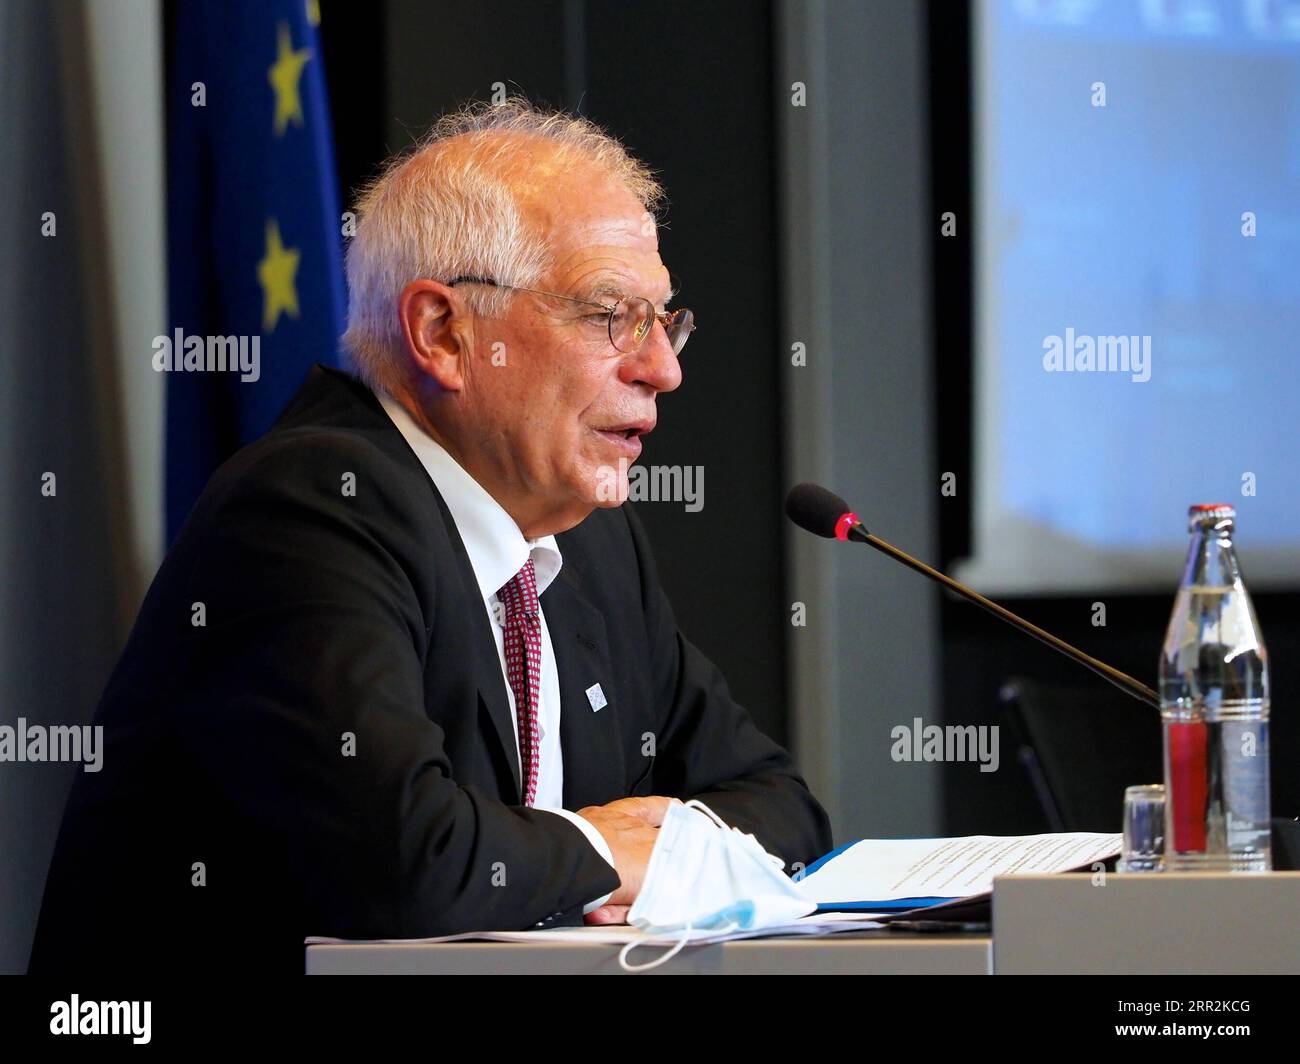 201013 -- LUXEMBOURG, Oct. 13, 2020 -- The High Representative of the EU for Foreign Affairs and Security Policy Josep Borrell attends a press conference in Luxembourg, on Oct. 12, 2020. Josep Borrell started to self-isolate on Tuesday after one of his entourage tested positive for COVID-19, he announced on Twitter. /Handout via Xinhua LUXEMBOURG-EU-FOREIGN POLICY CHIEF-JOSEP BORRELL-SELF-QUARANTINE EuropeanxUnion PUBLICATIONxNOTxINxCHN Stock Photo